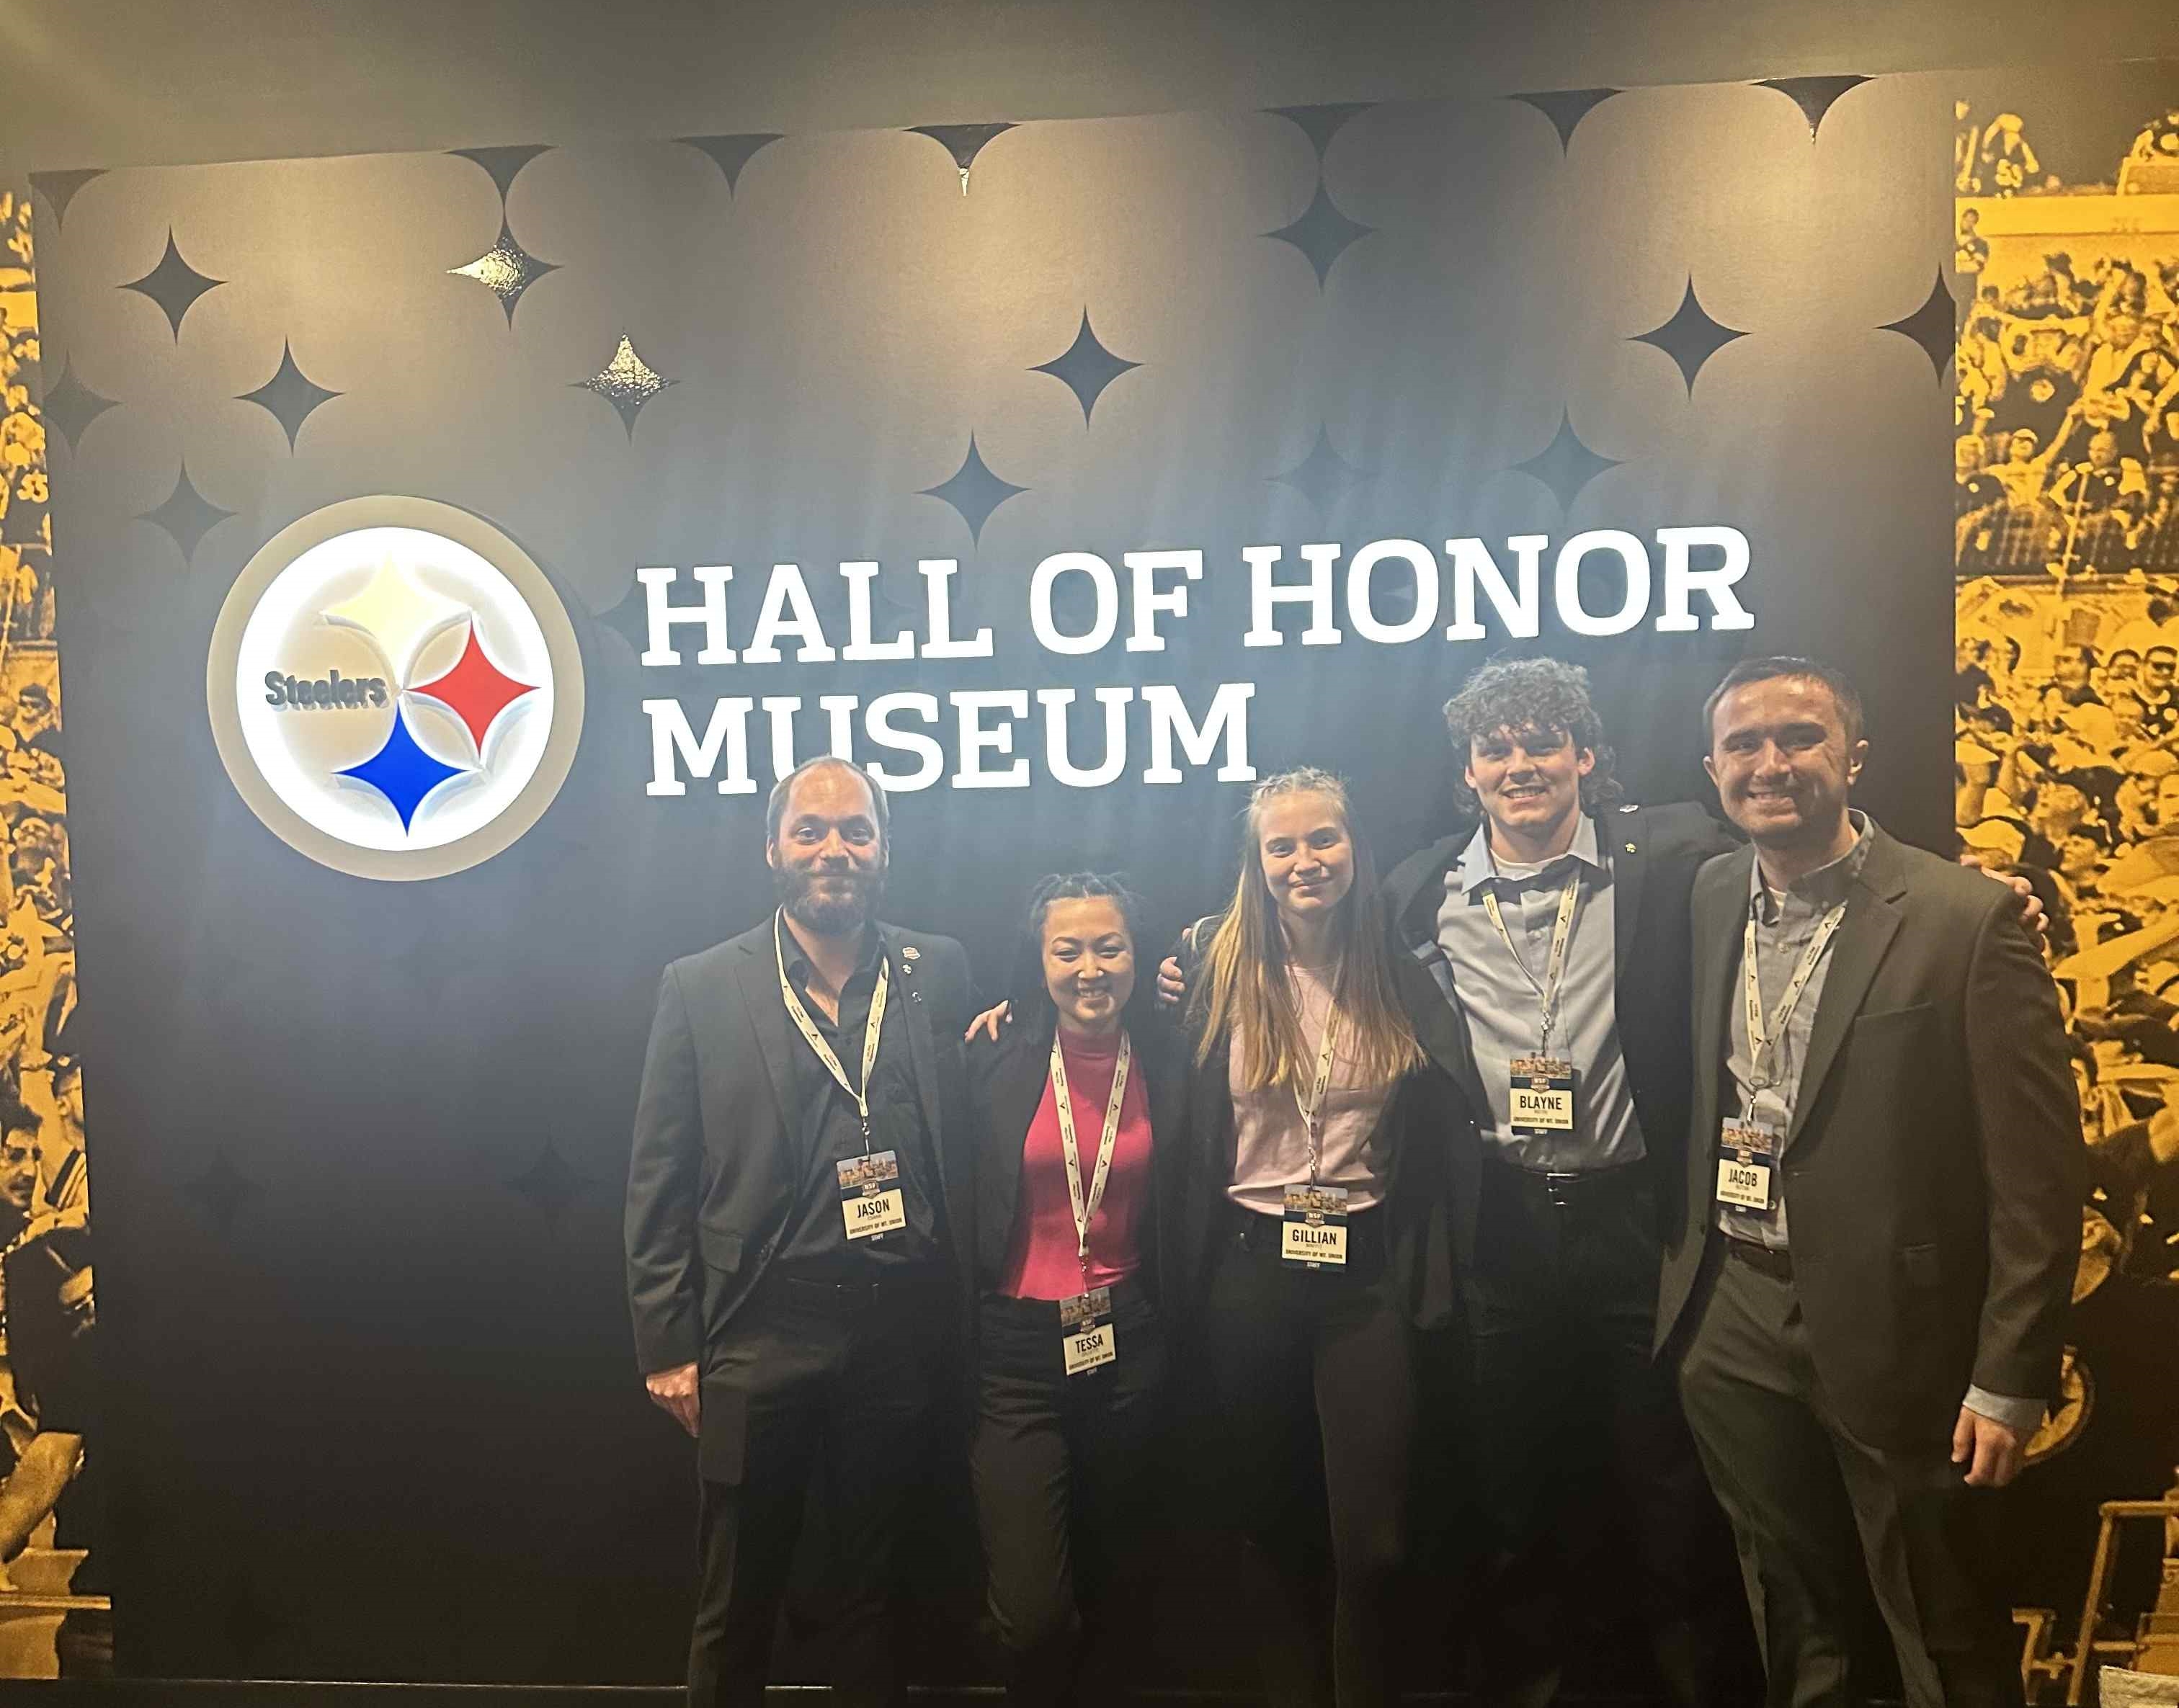 mount union students at steelers wall of honor